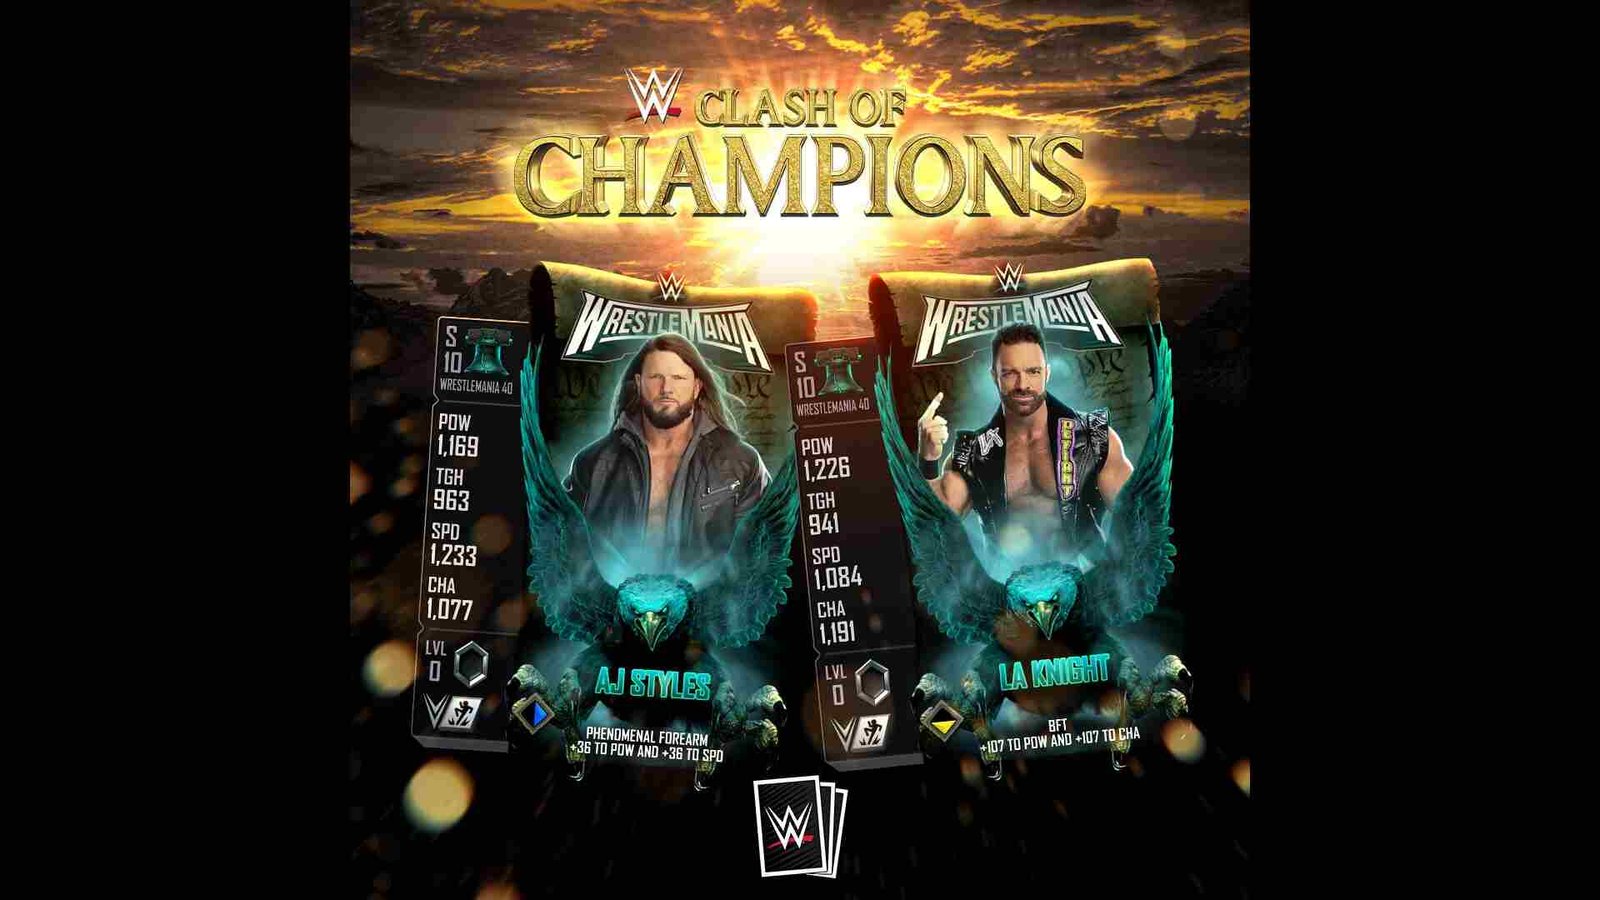 WWE SuperCard network error: How to fix it?